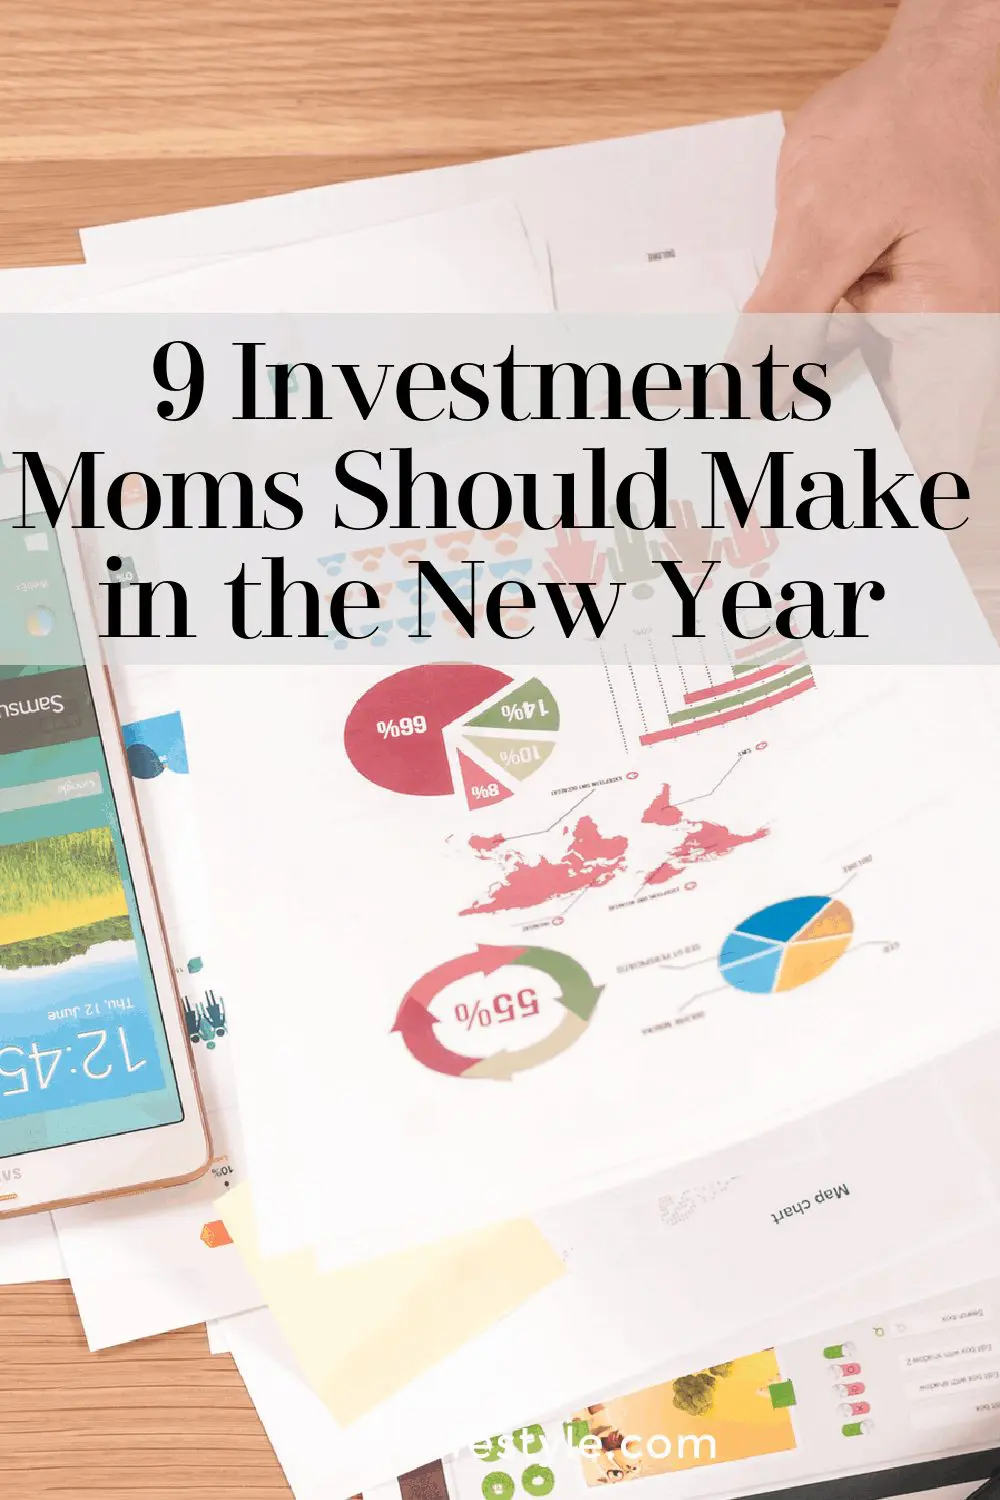 Investments Moms Should Make in the New Year